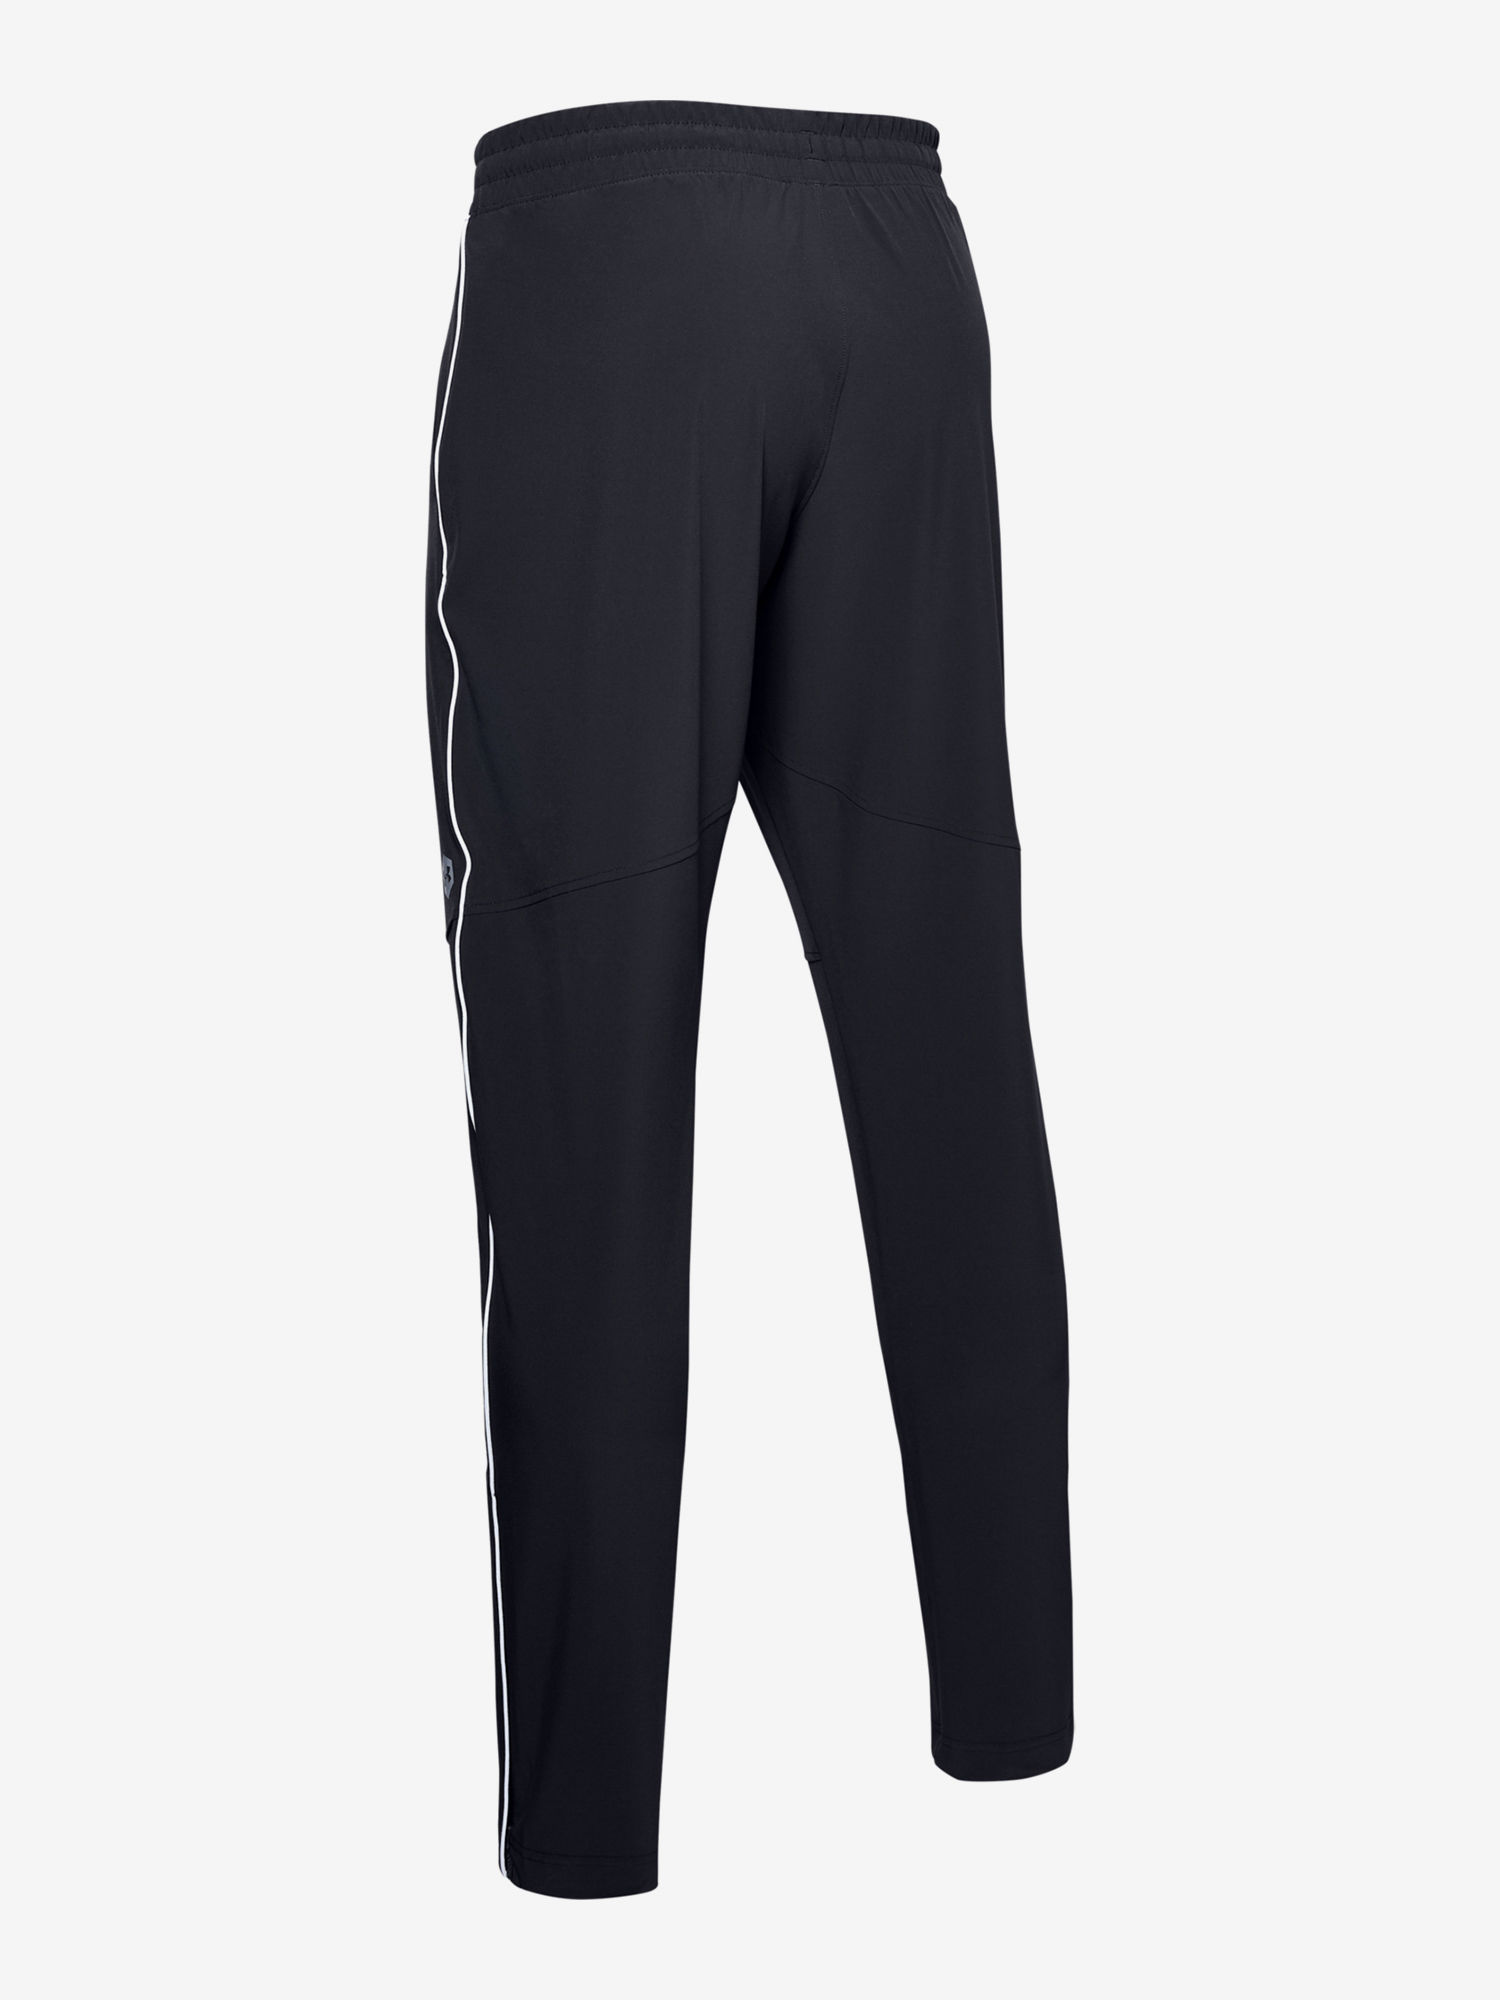 Tepláky Under Armour Athlete Recovery Woven Warm Up Bottom-BL (4)